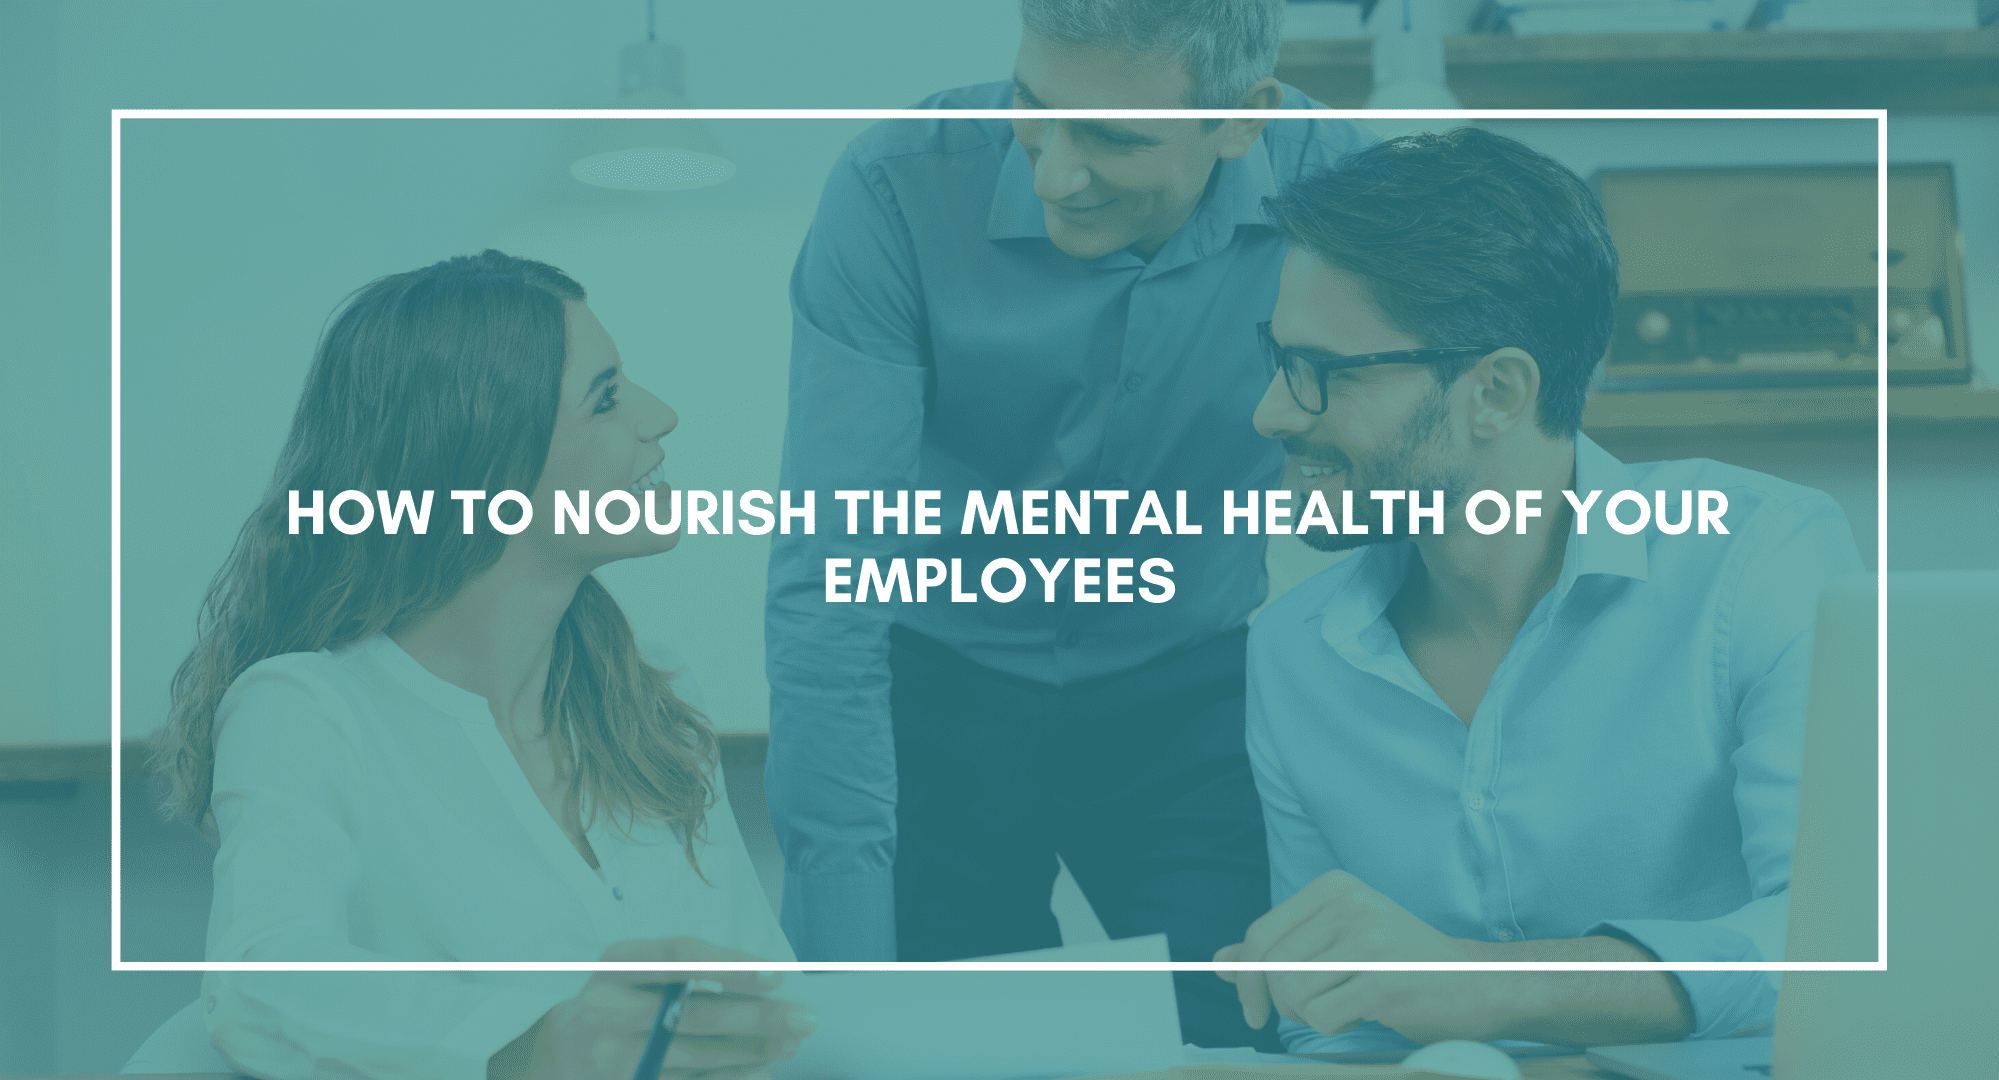 how to support the mental health of remote employees. Mental well-being of remote employees. Tips to suppport mental health of remote employees.